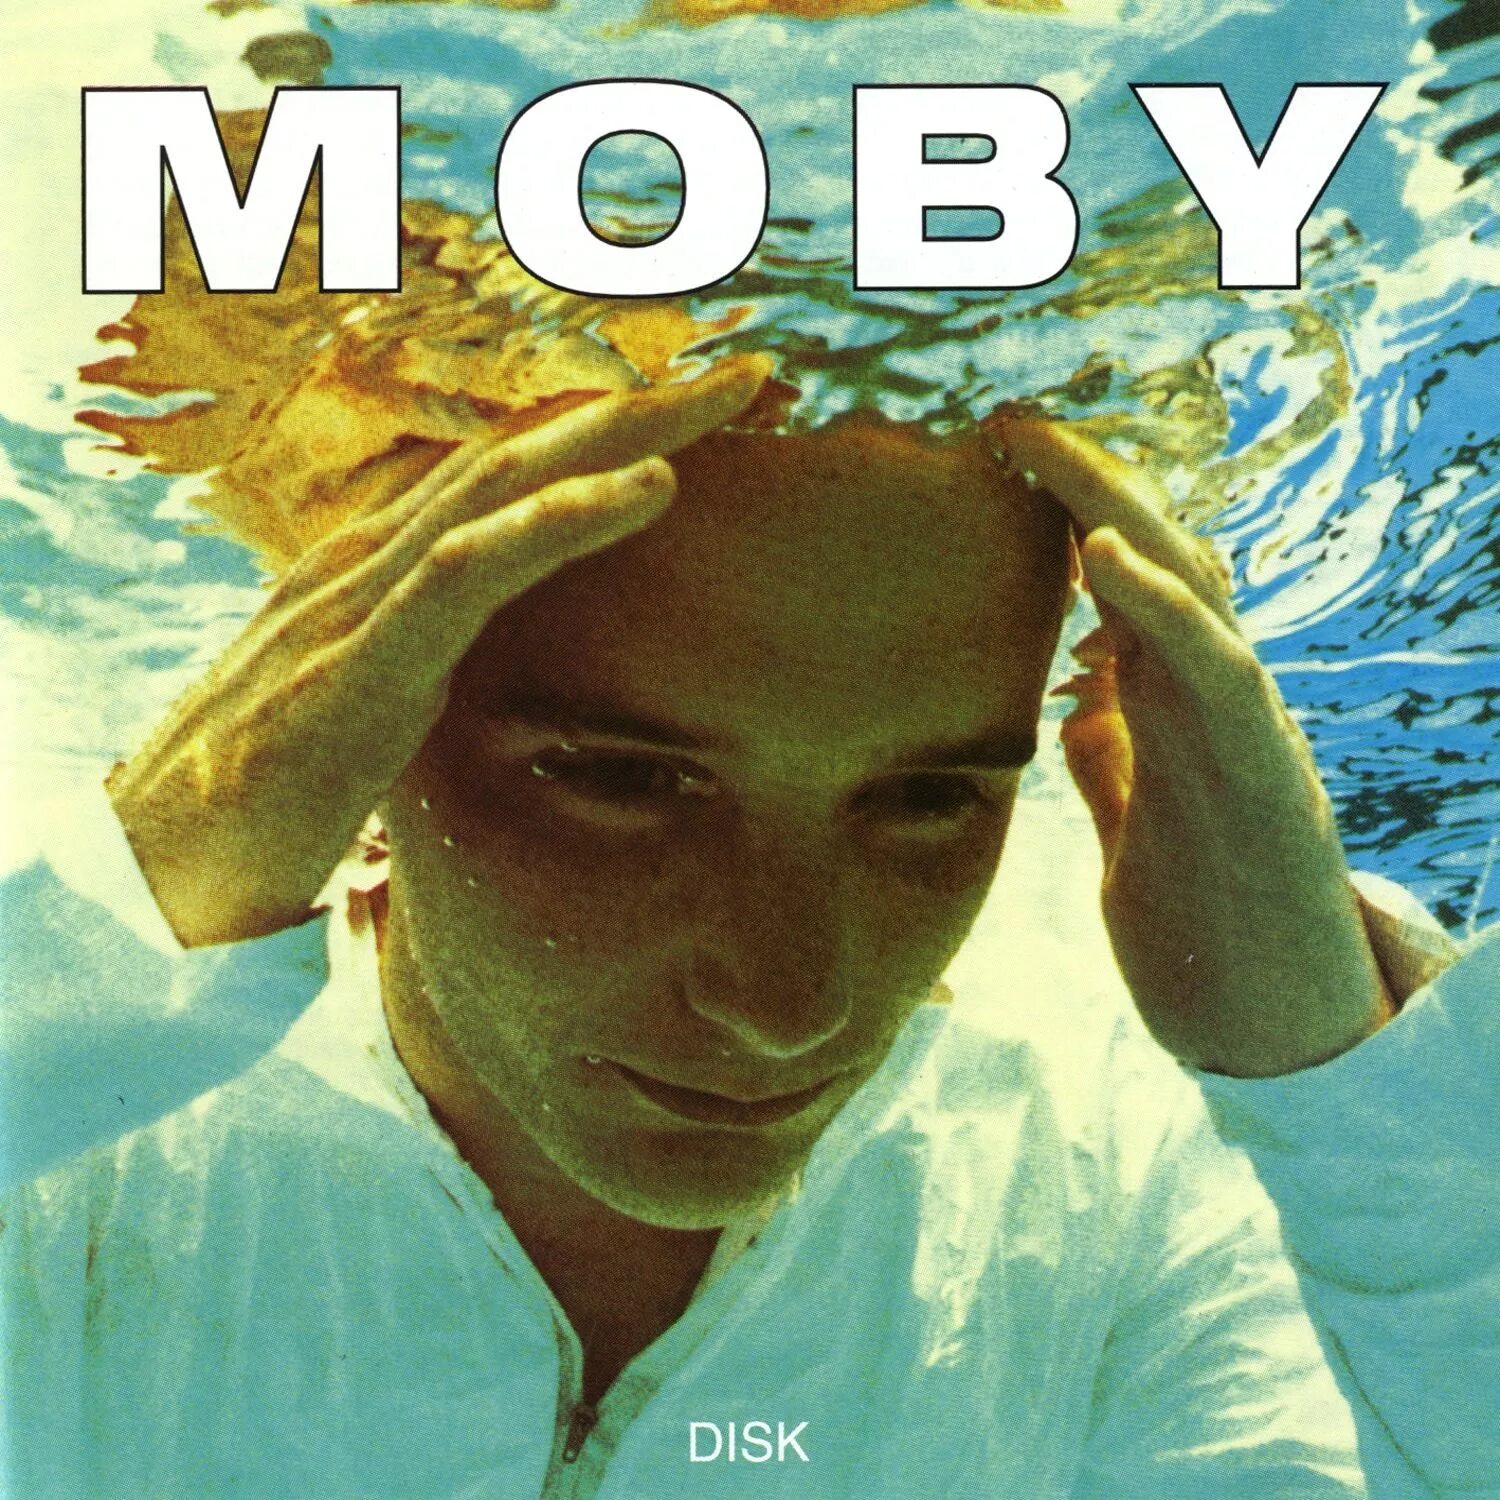 Moby обложка. Moby альбомы. Моби обложки альбомов. Moby porcelan обложка альбома.